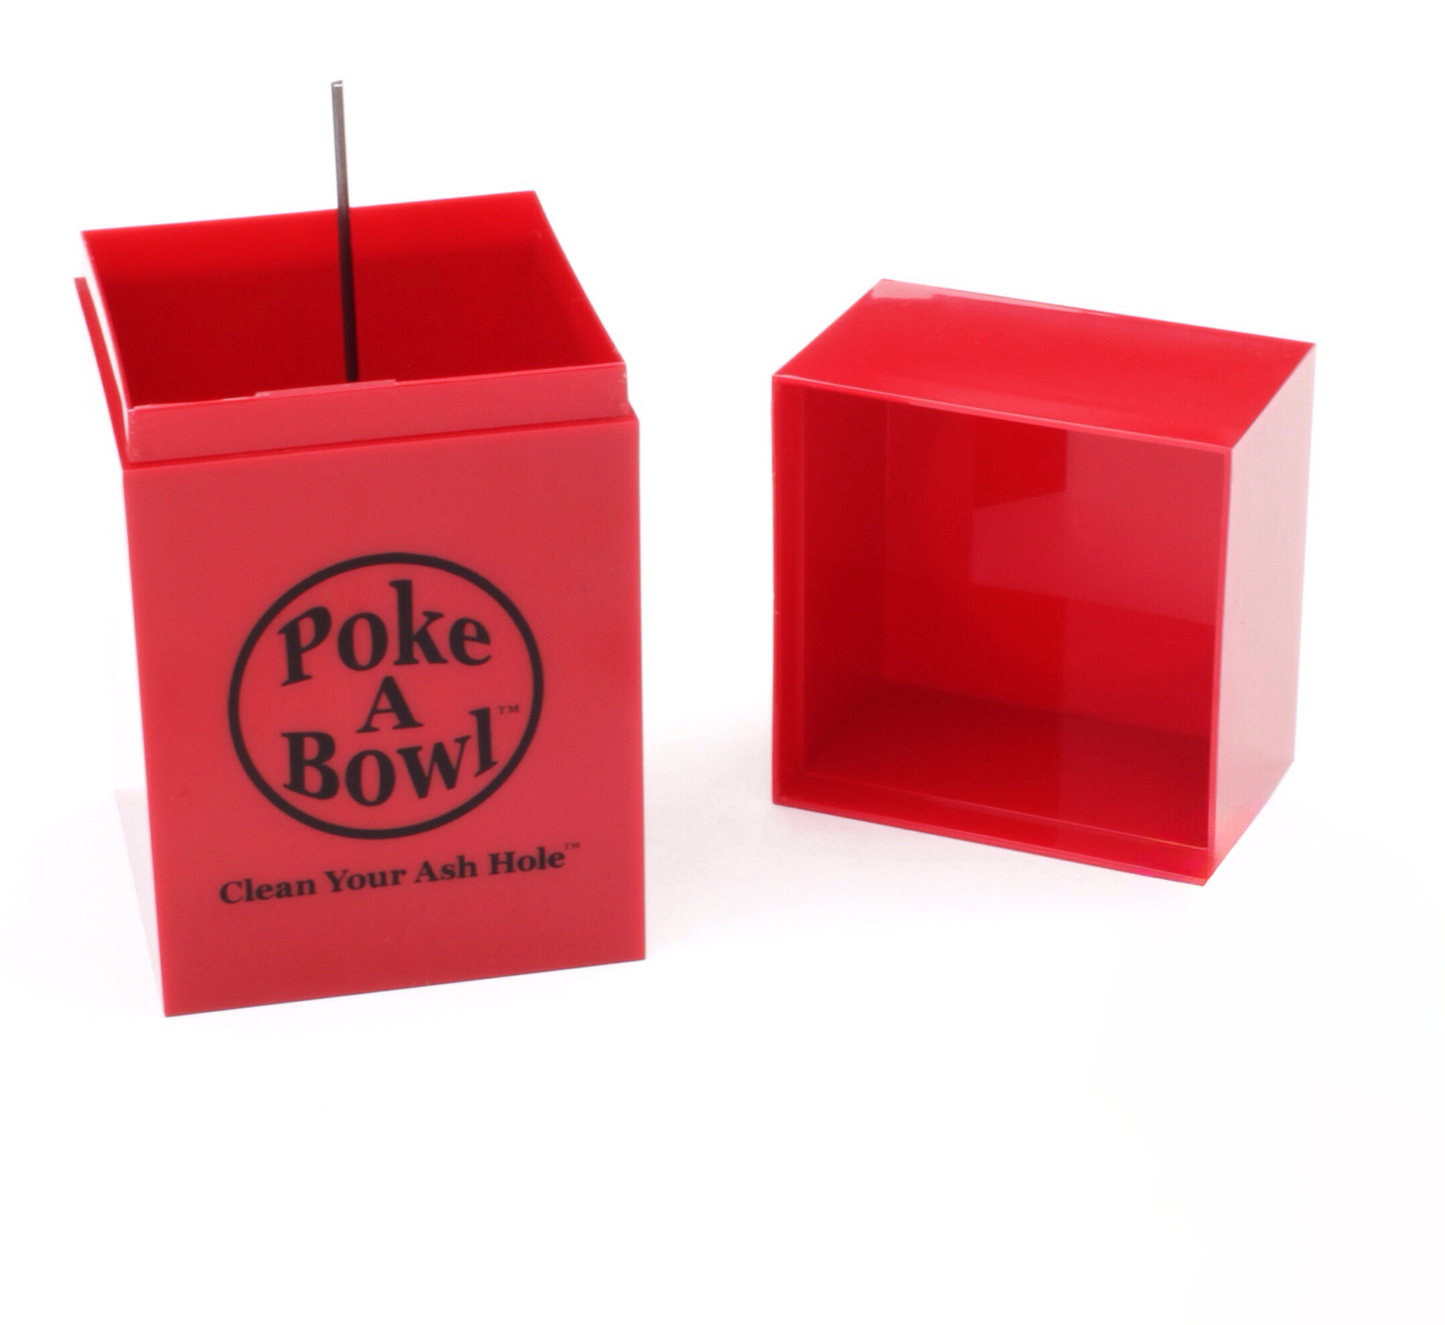 A red, box-shaped ashtray with the lid removed is shown. The ashtray is labeled "Poke A Bowl - Clean Your Ash Hole" on the side in white text. The lid is placed beside the ashtray on the right, and a thin metal poker is visible inside the ashtray.